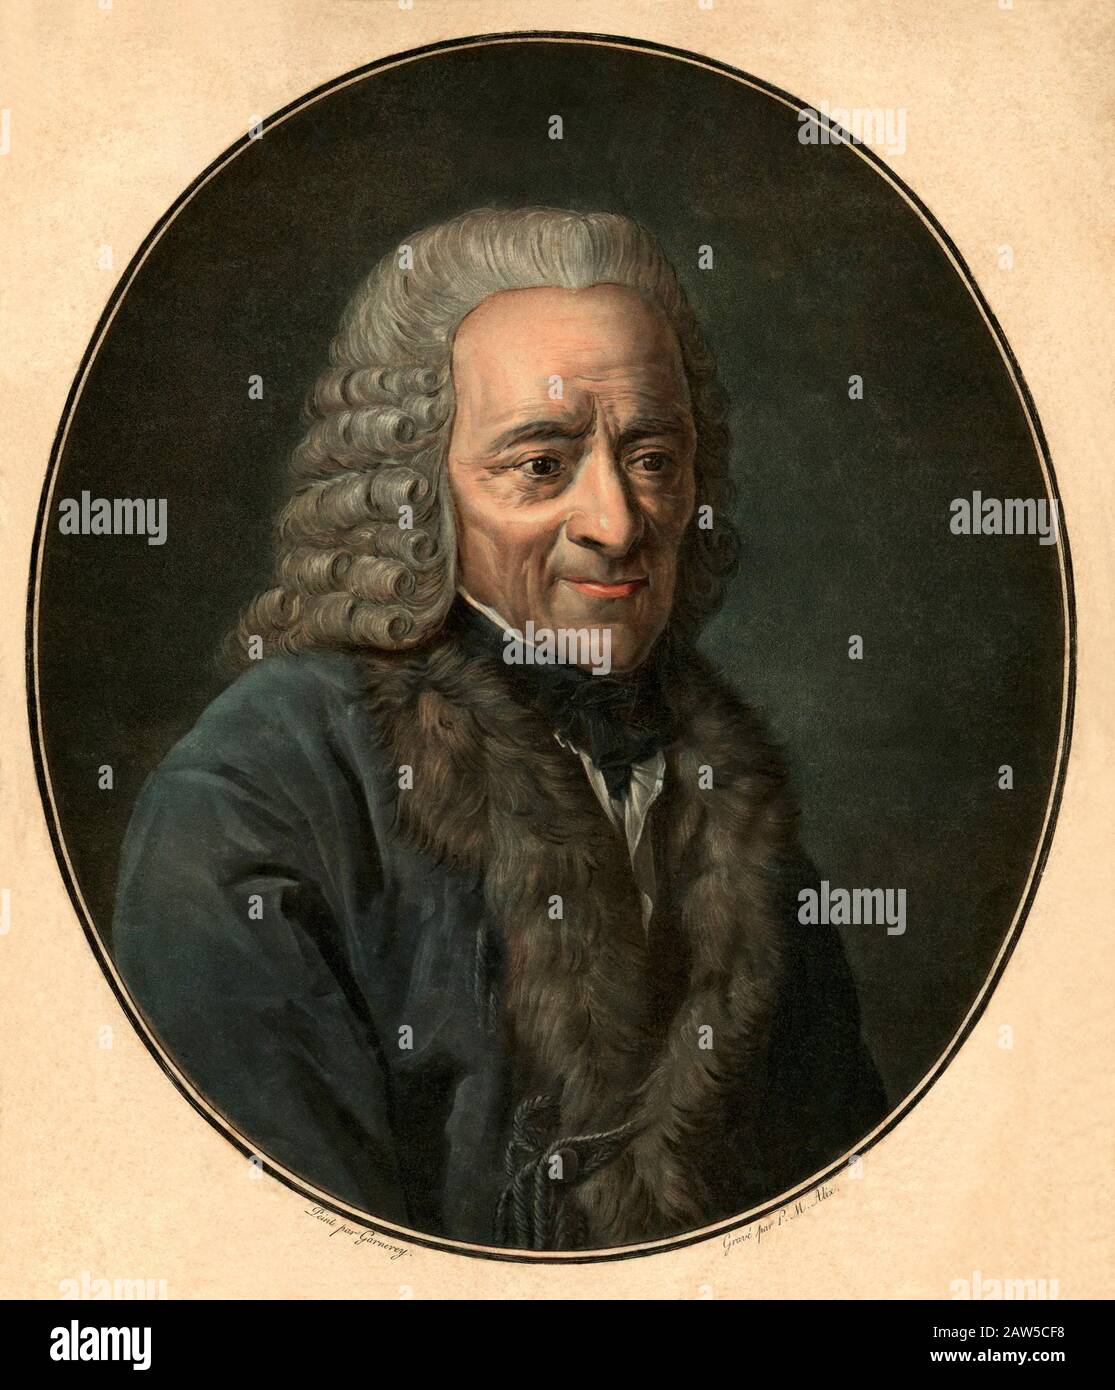 1780 ca , FRANCE : Francois-Marie Arouet ( 1694 - 1778 ), better known by the pen name VOLTAIRE , was a French Enlightenment writer, essayist , deist Stock Photo